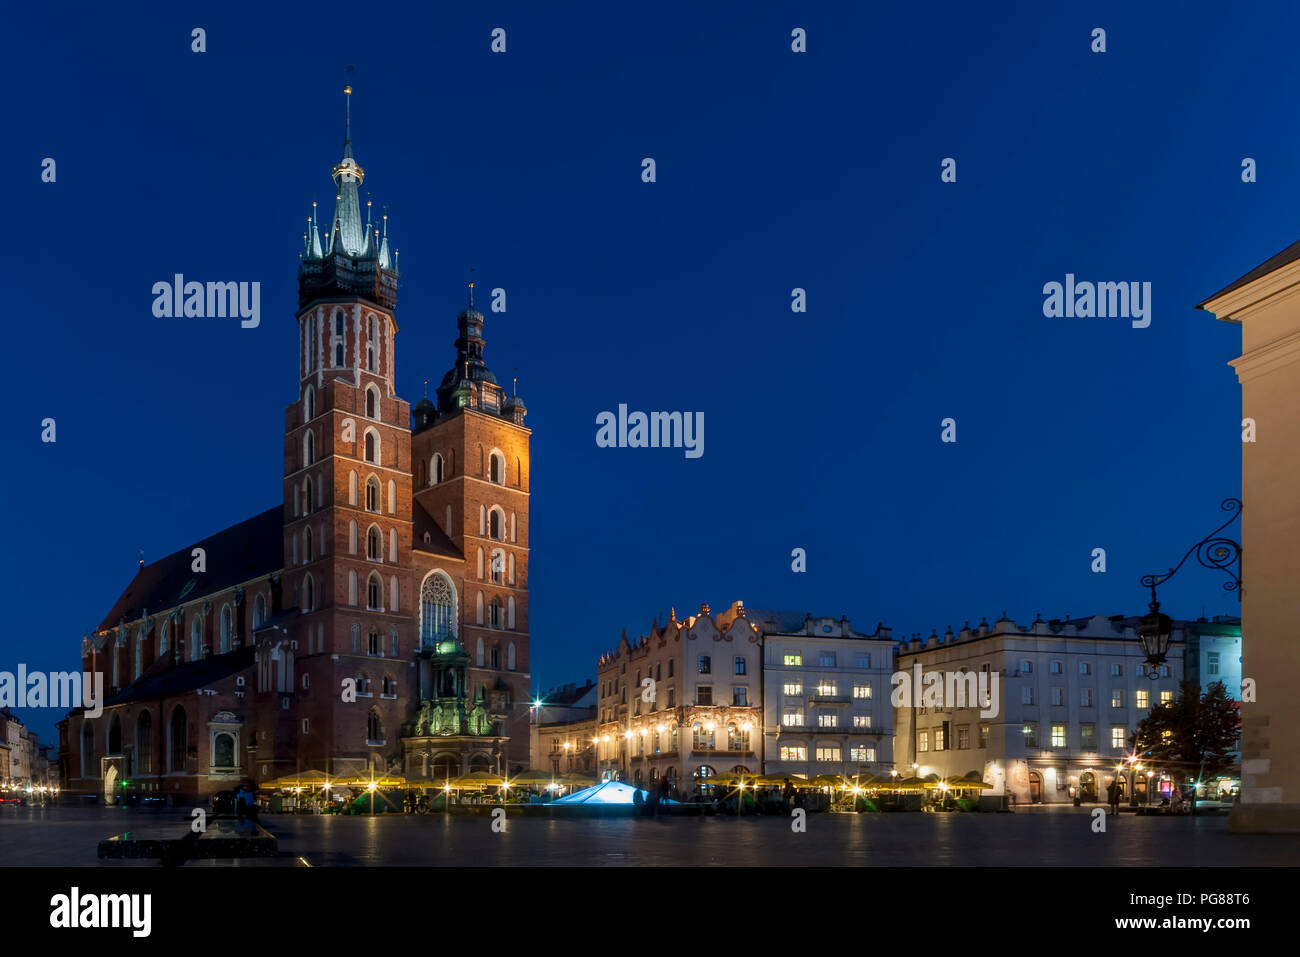 Beautiful view of the famous Saint Mary's Church Basilica and the main market square in the historic center of Krakow, Poland in the blue hour light Stock Photo